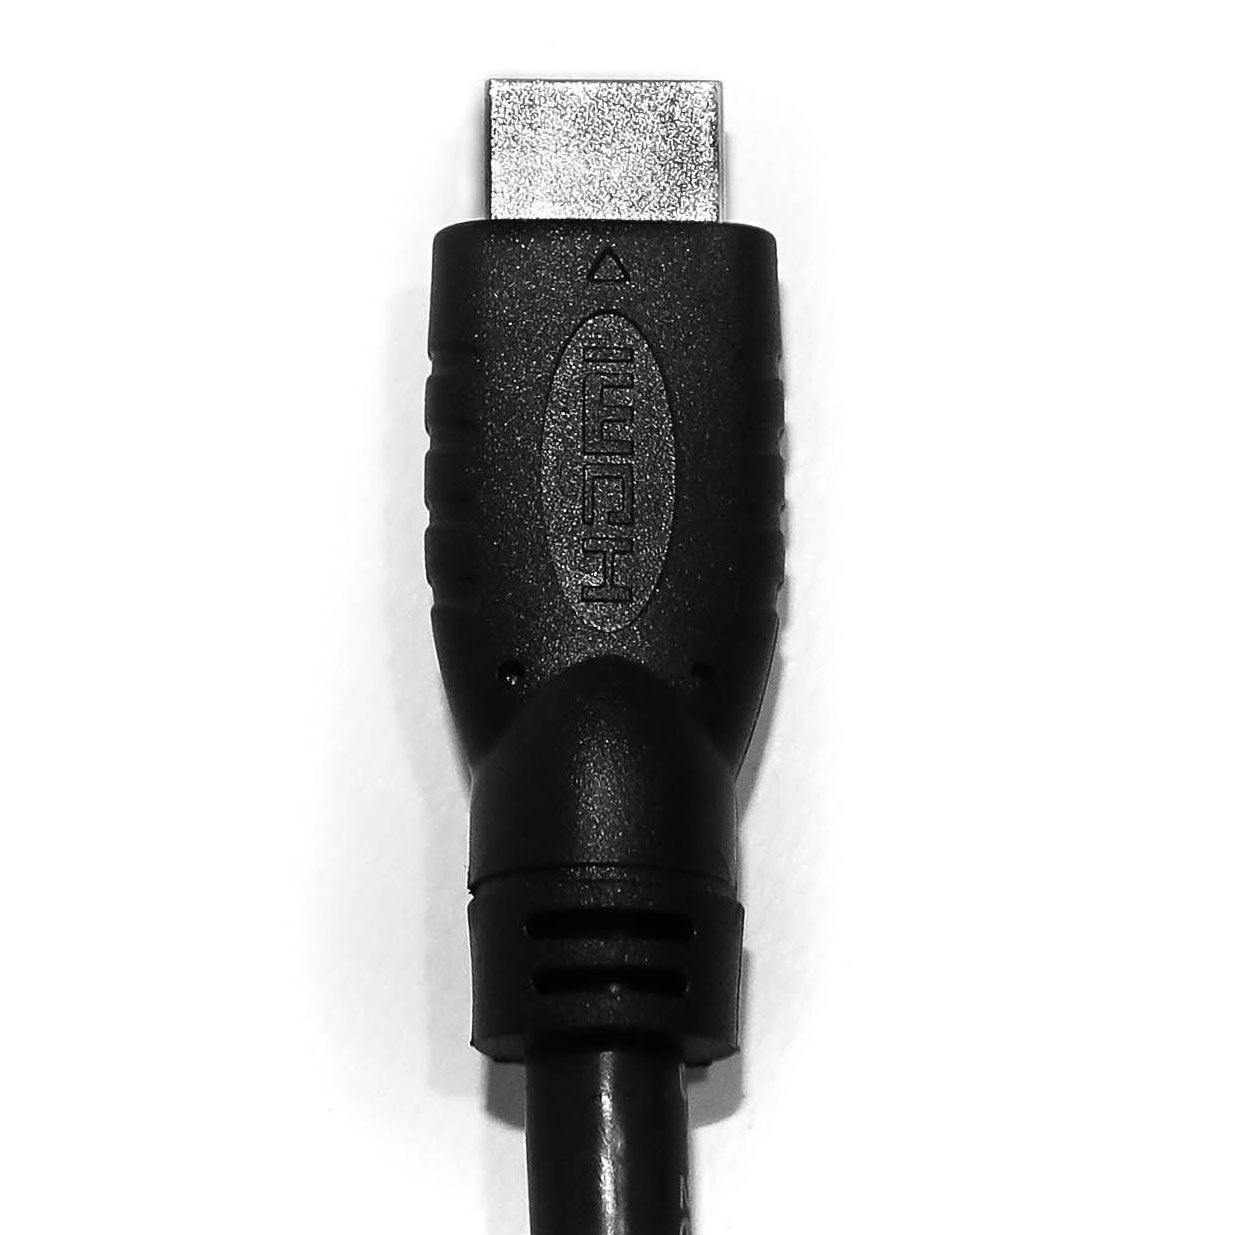 HDMI Cable by NetStrand, High Speed with Ethernet 3D FireFold